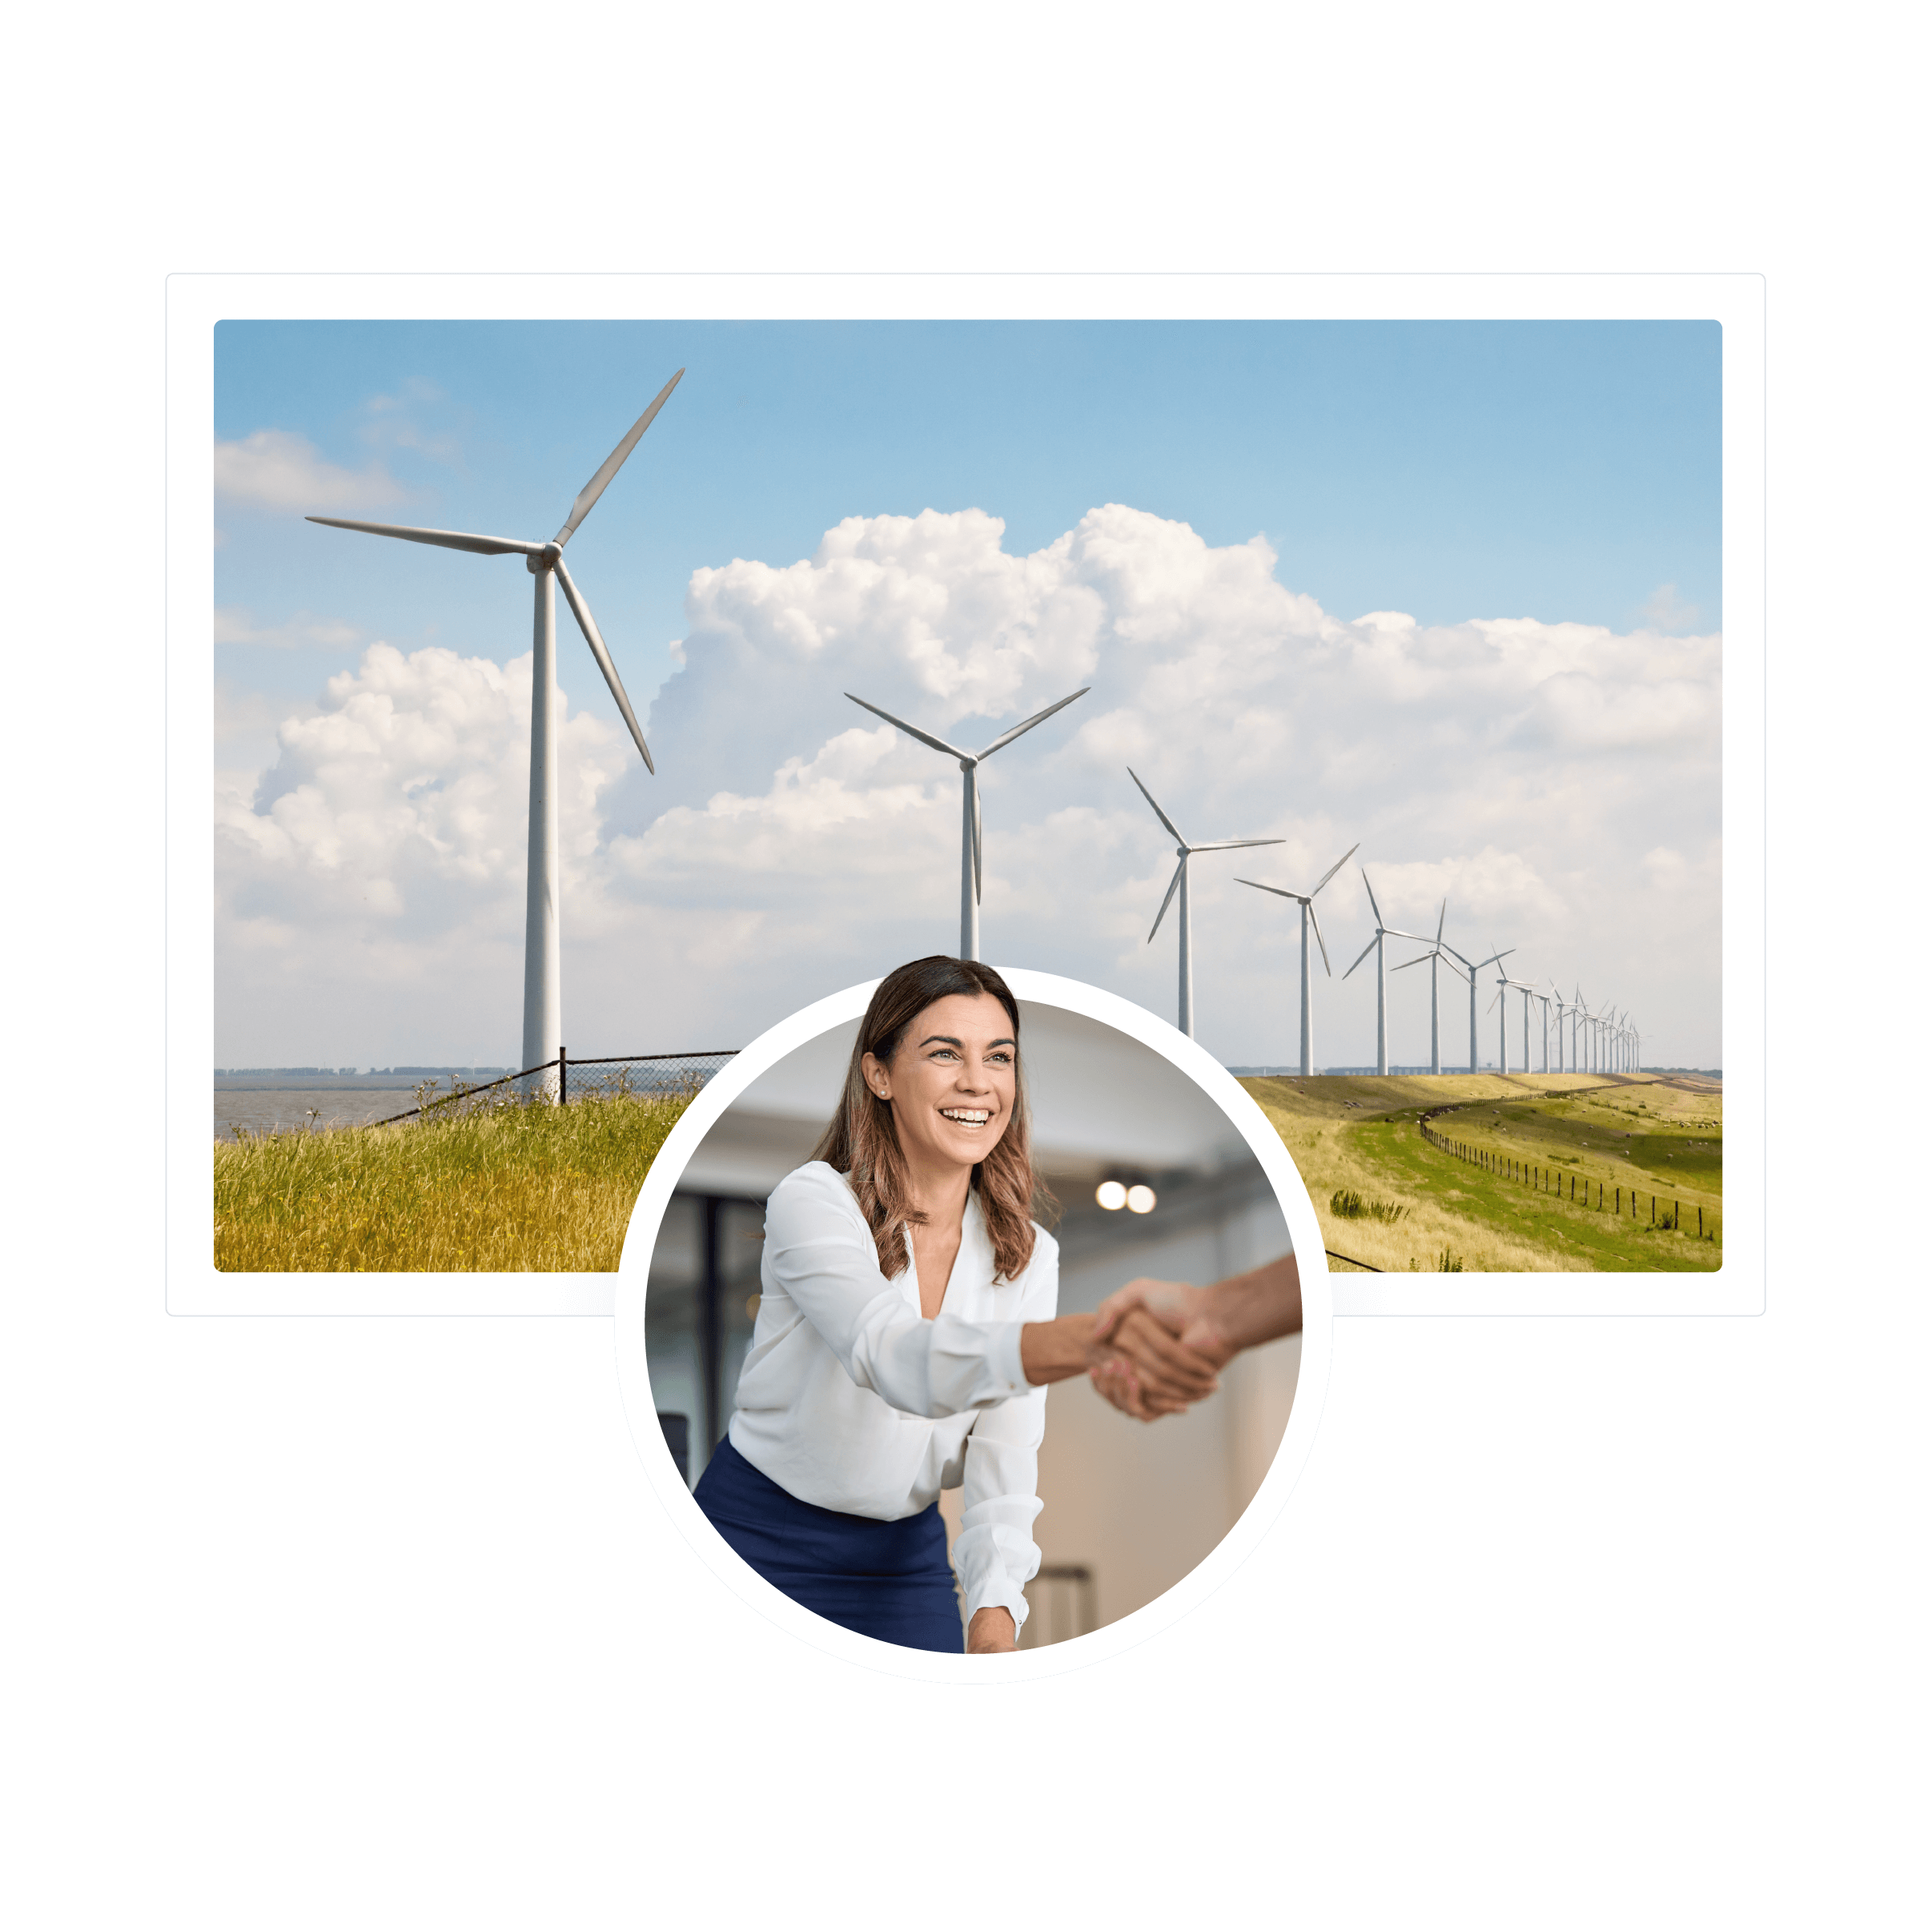 An image of a wind turbine site and a women making a deal